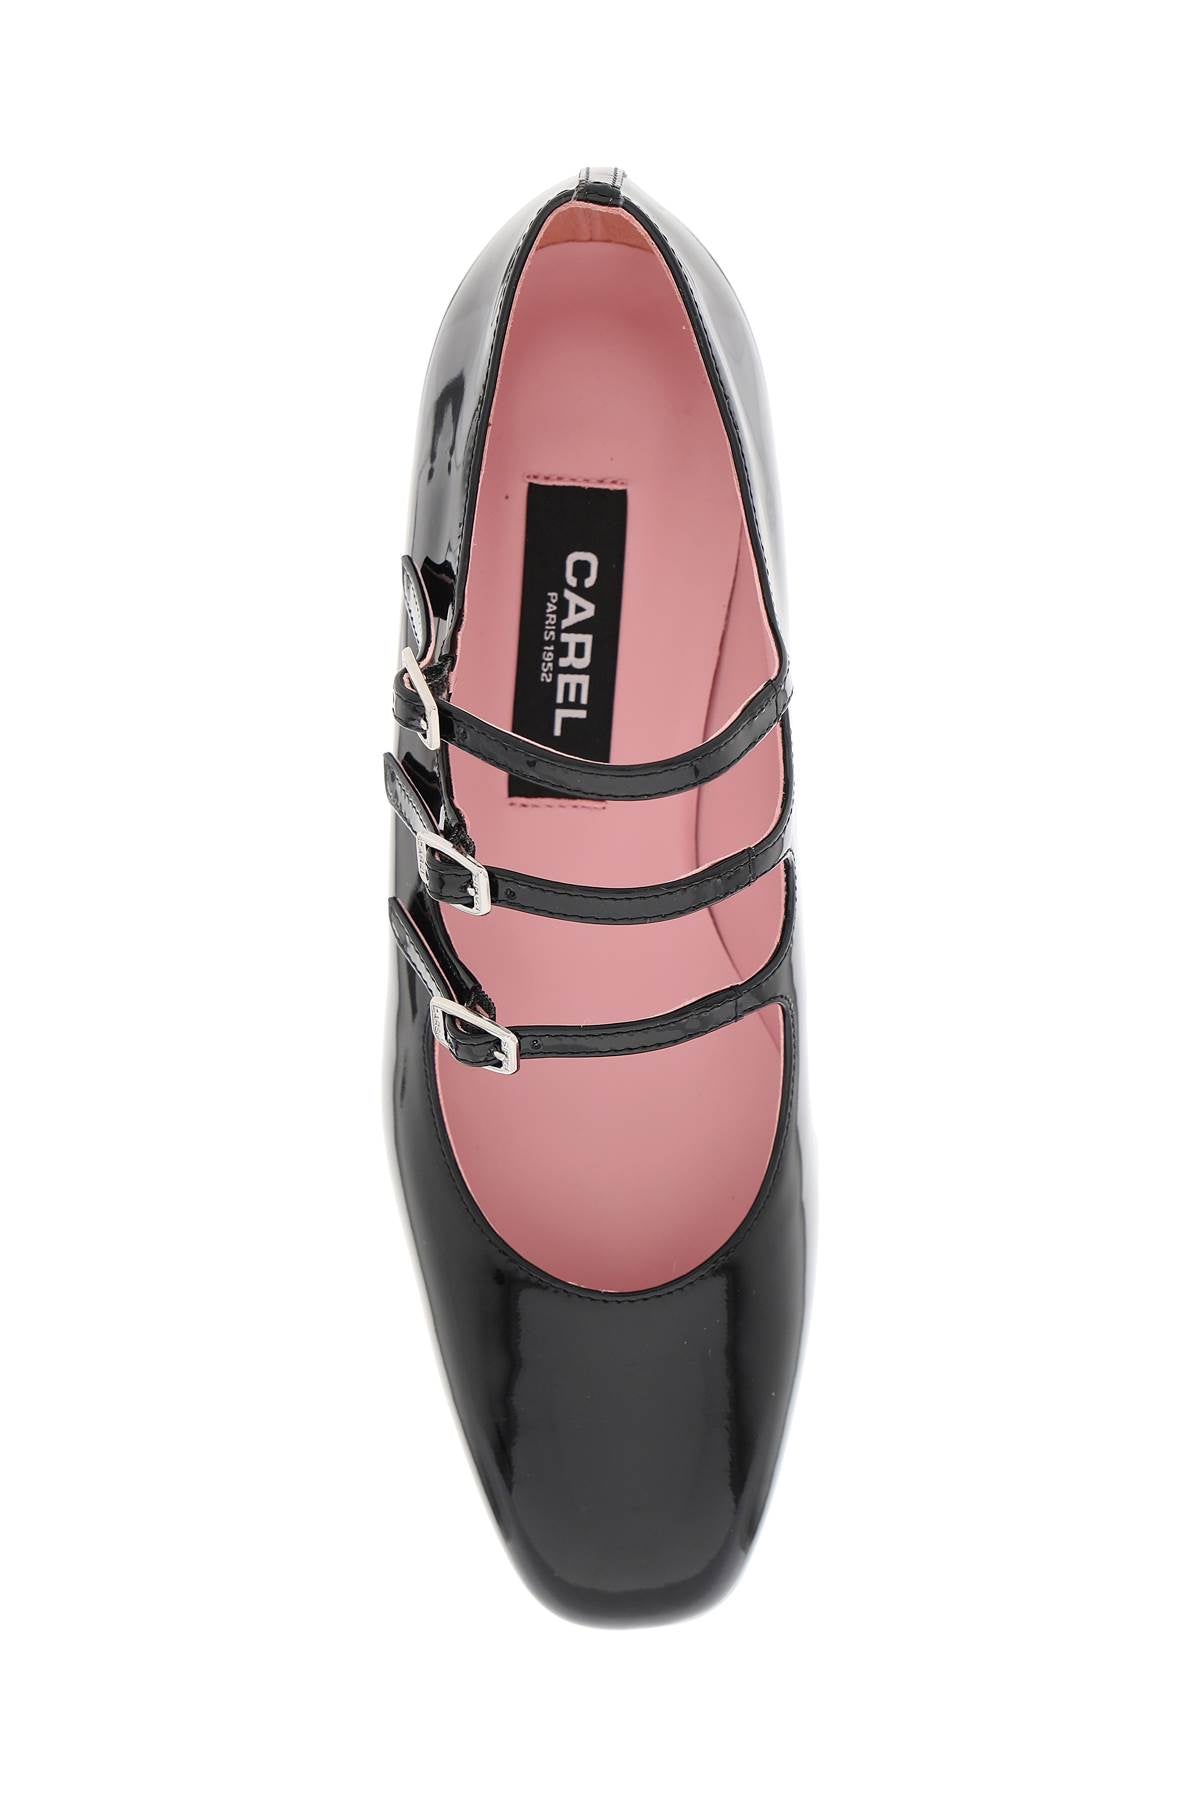 Carel patent leather ariana mary jane-1